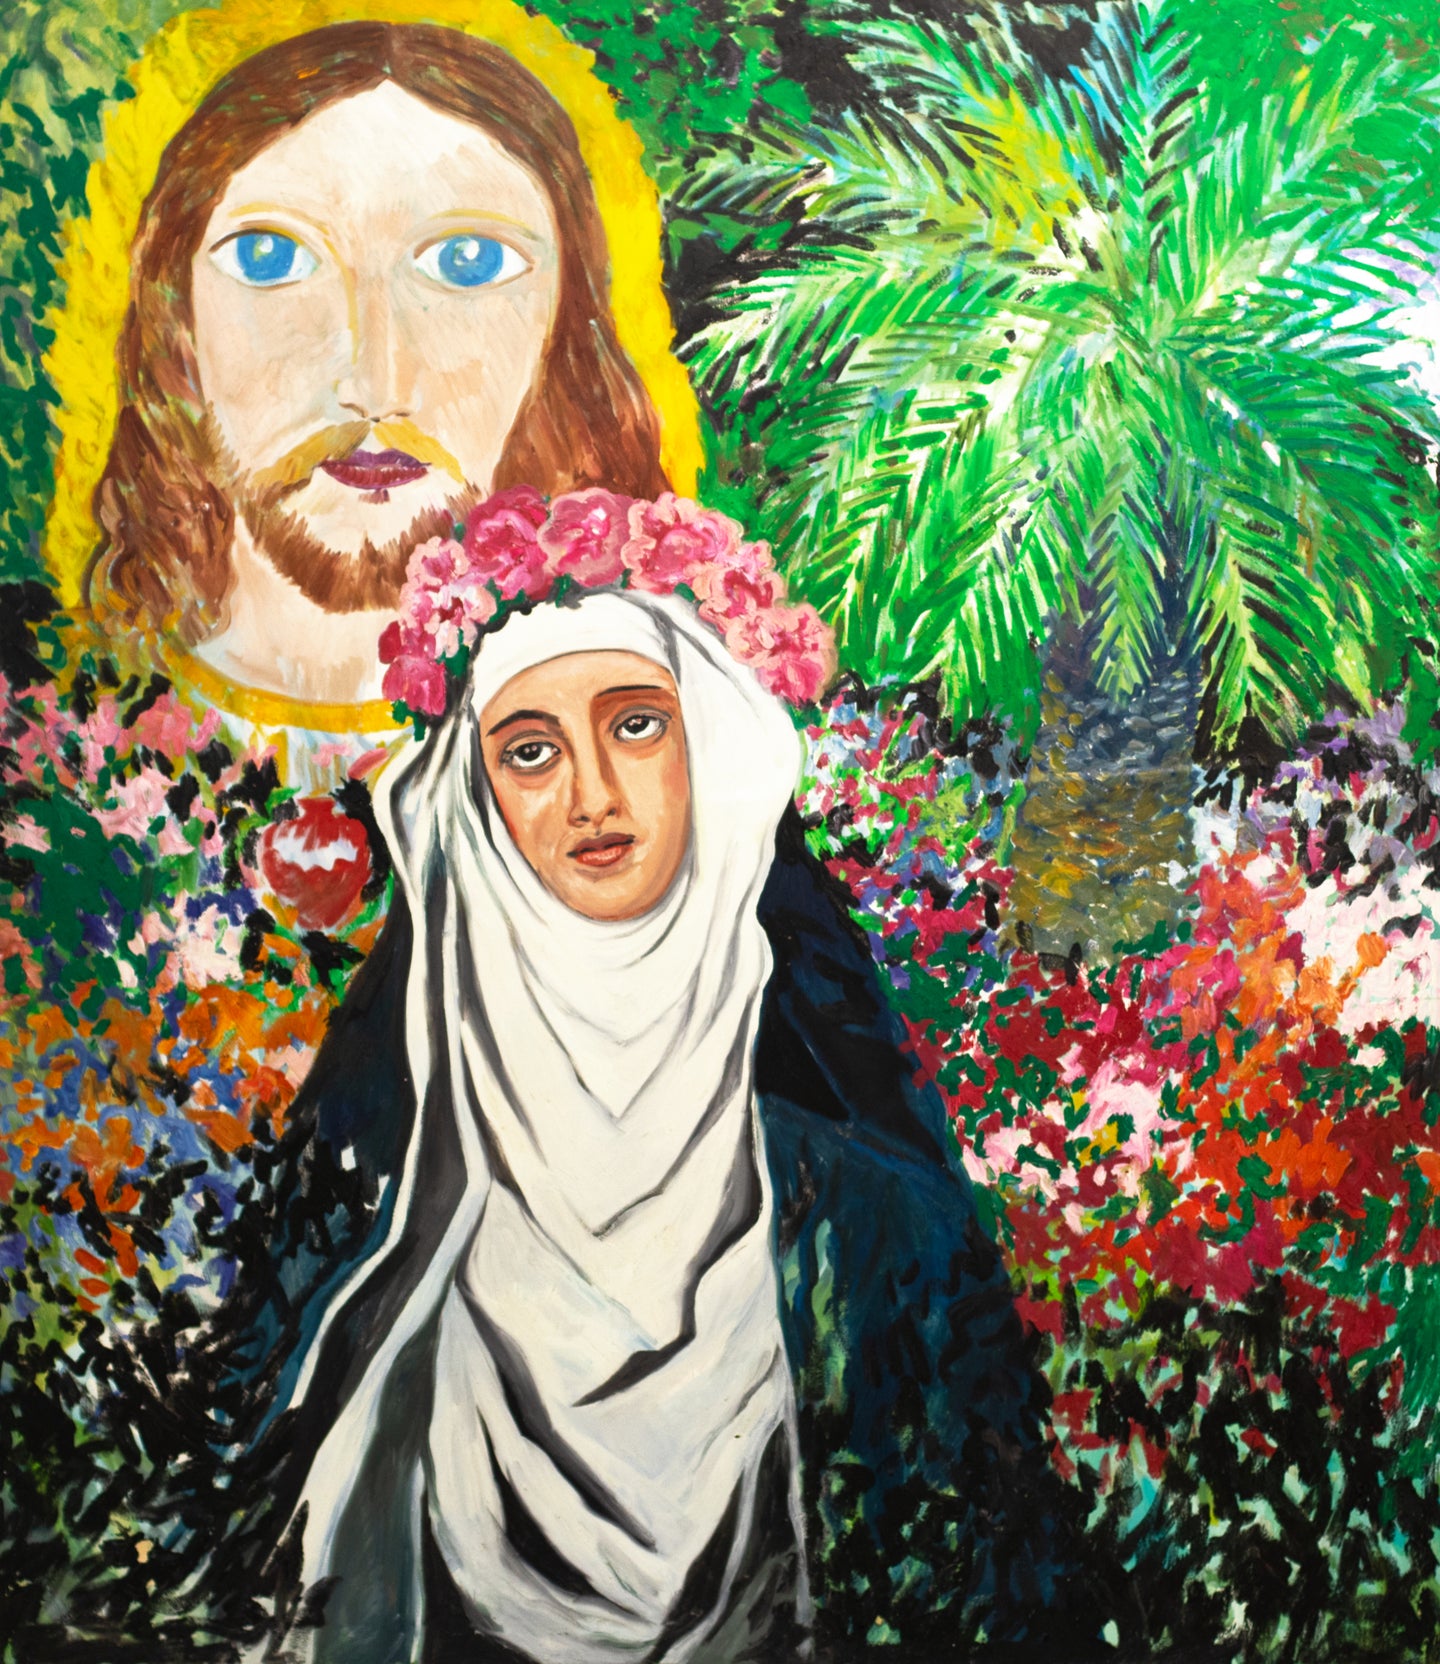 Hunt Slonem, Saint Rosa of Lima, 1984,  Oil on canvas, 84 x 72 inches ,The beautiful St. Rose of Lima appears in a number of Slonem’, works. She is the first saint of the New World and the garden she worked became the spiritual center of Lima. She modeled her austere rays after St. Catherine of Siena. Available at Manolis Projects Gallery